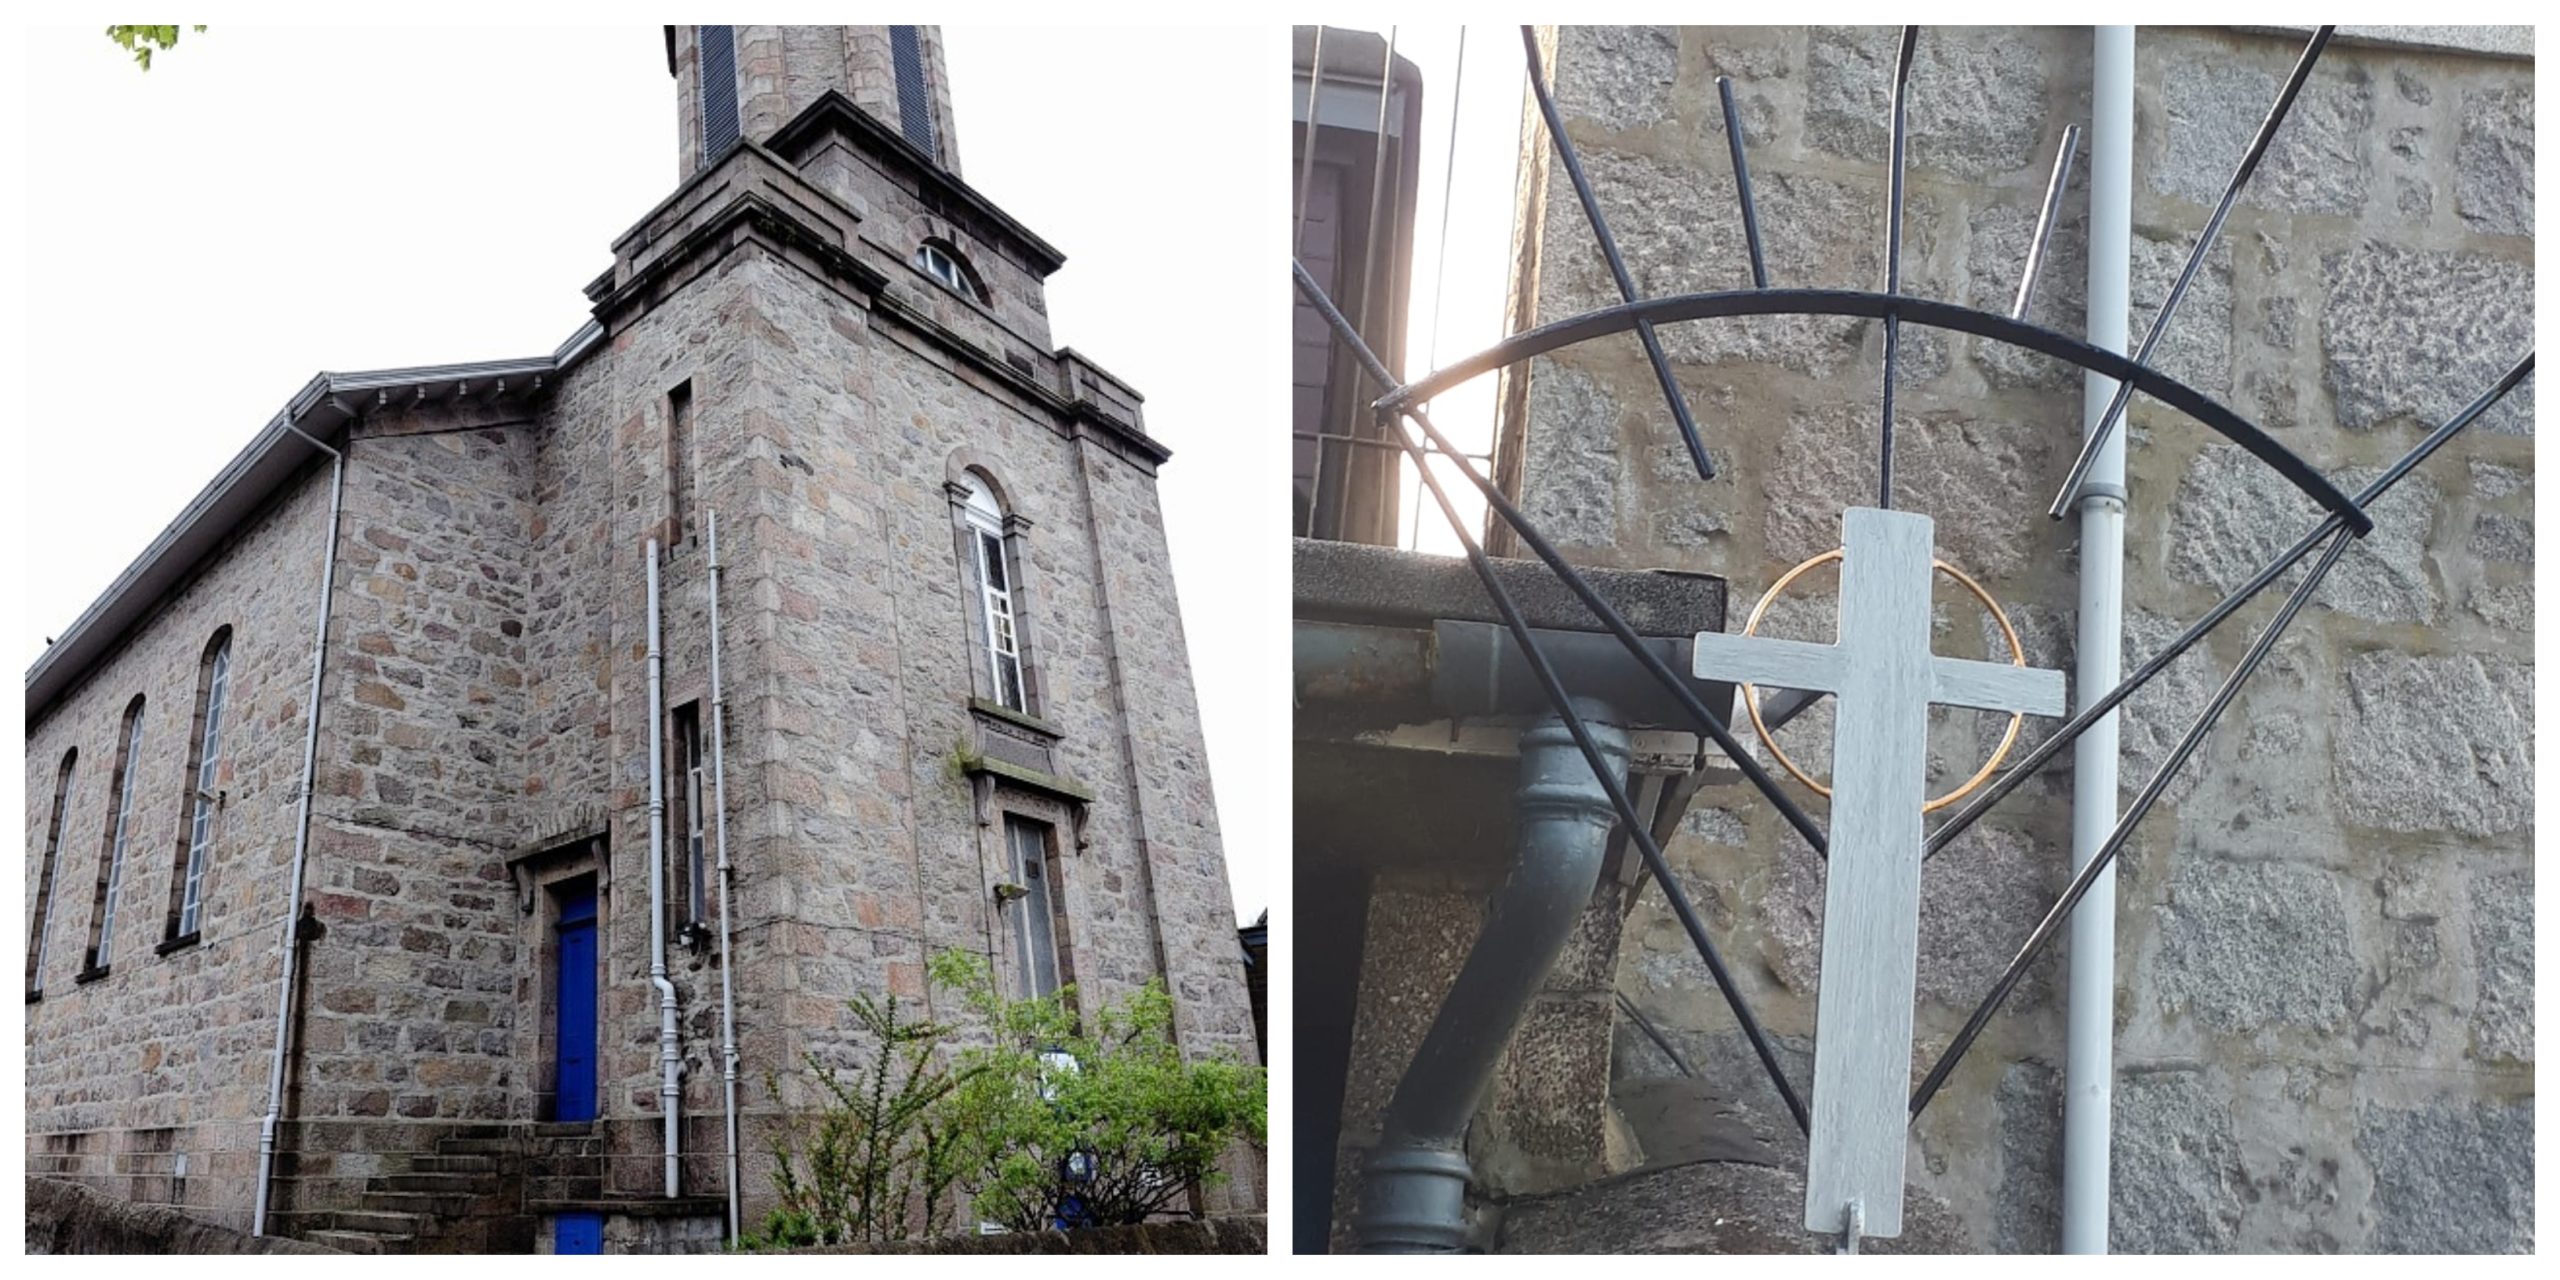 Woodside Parish Church, left, picture by Kami Thomson. 
The cross, right, was made by Baird Shepherd